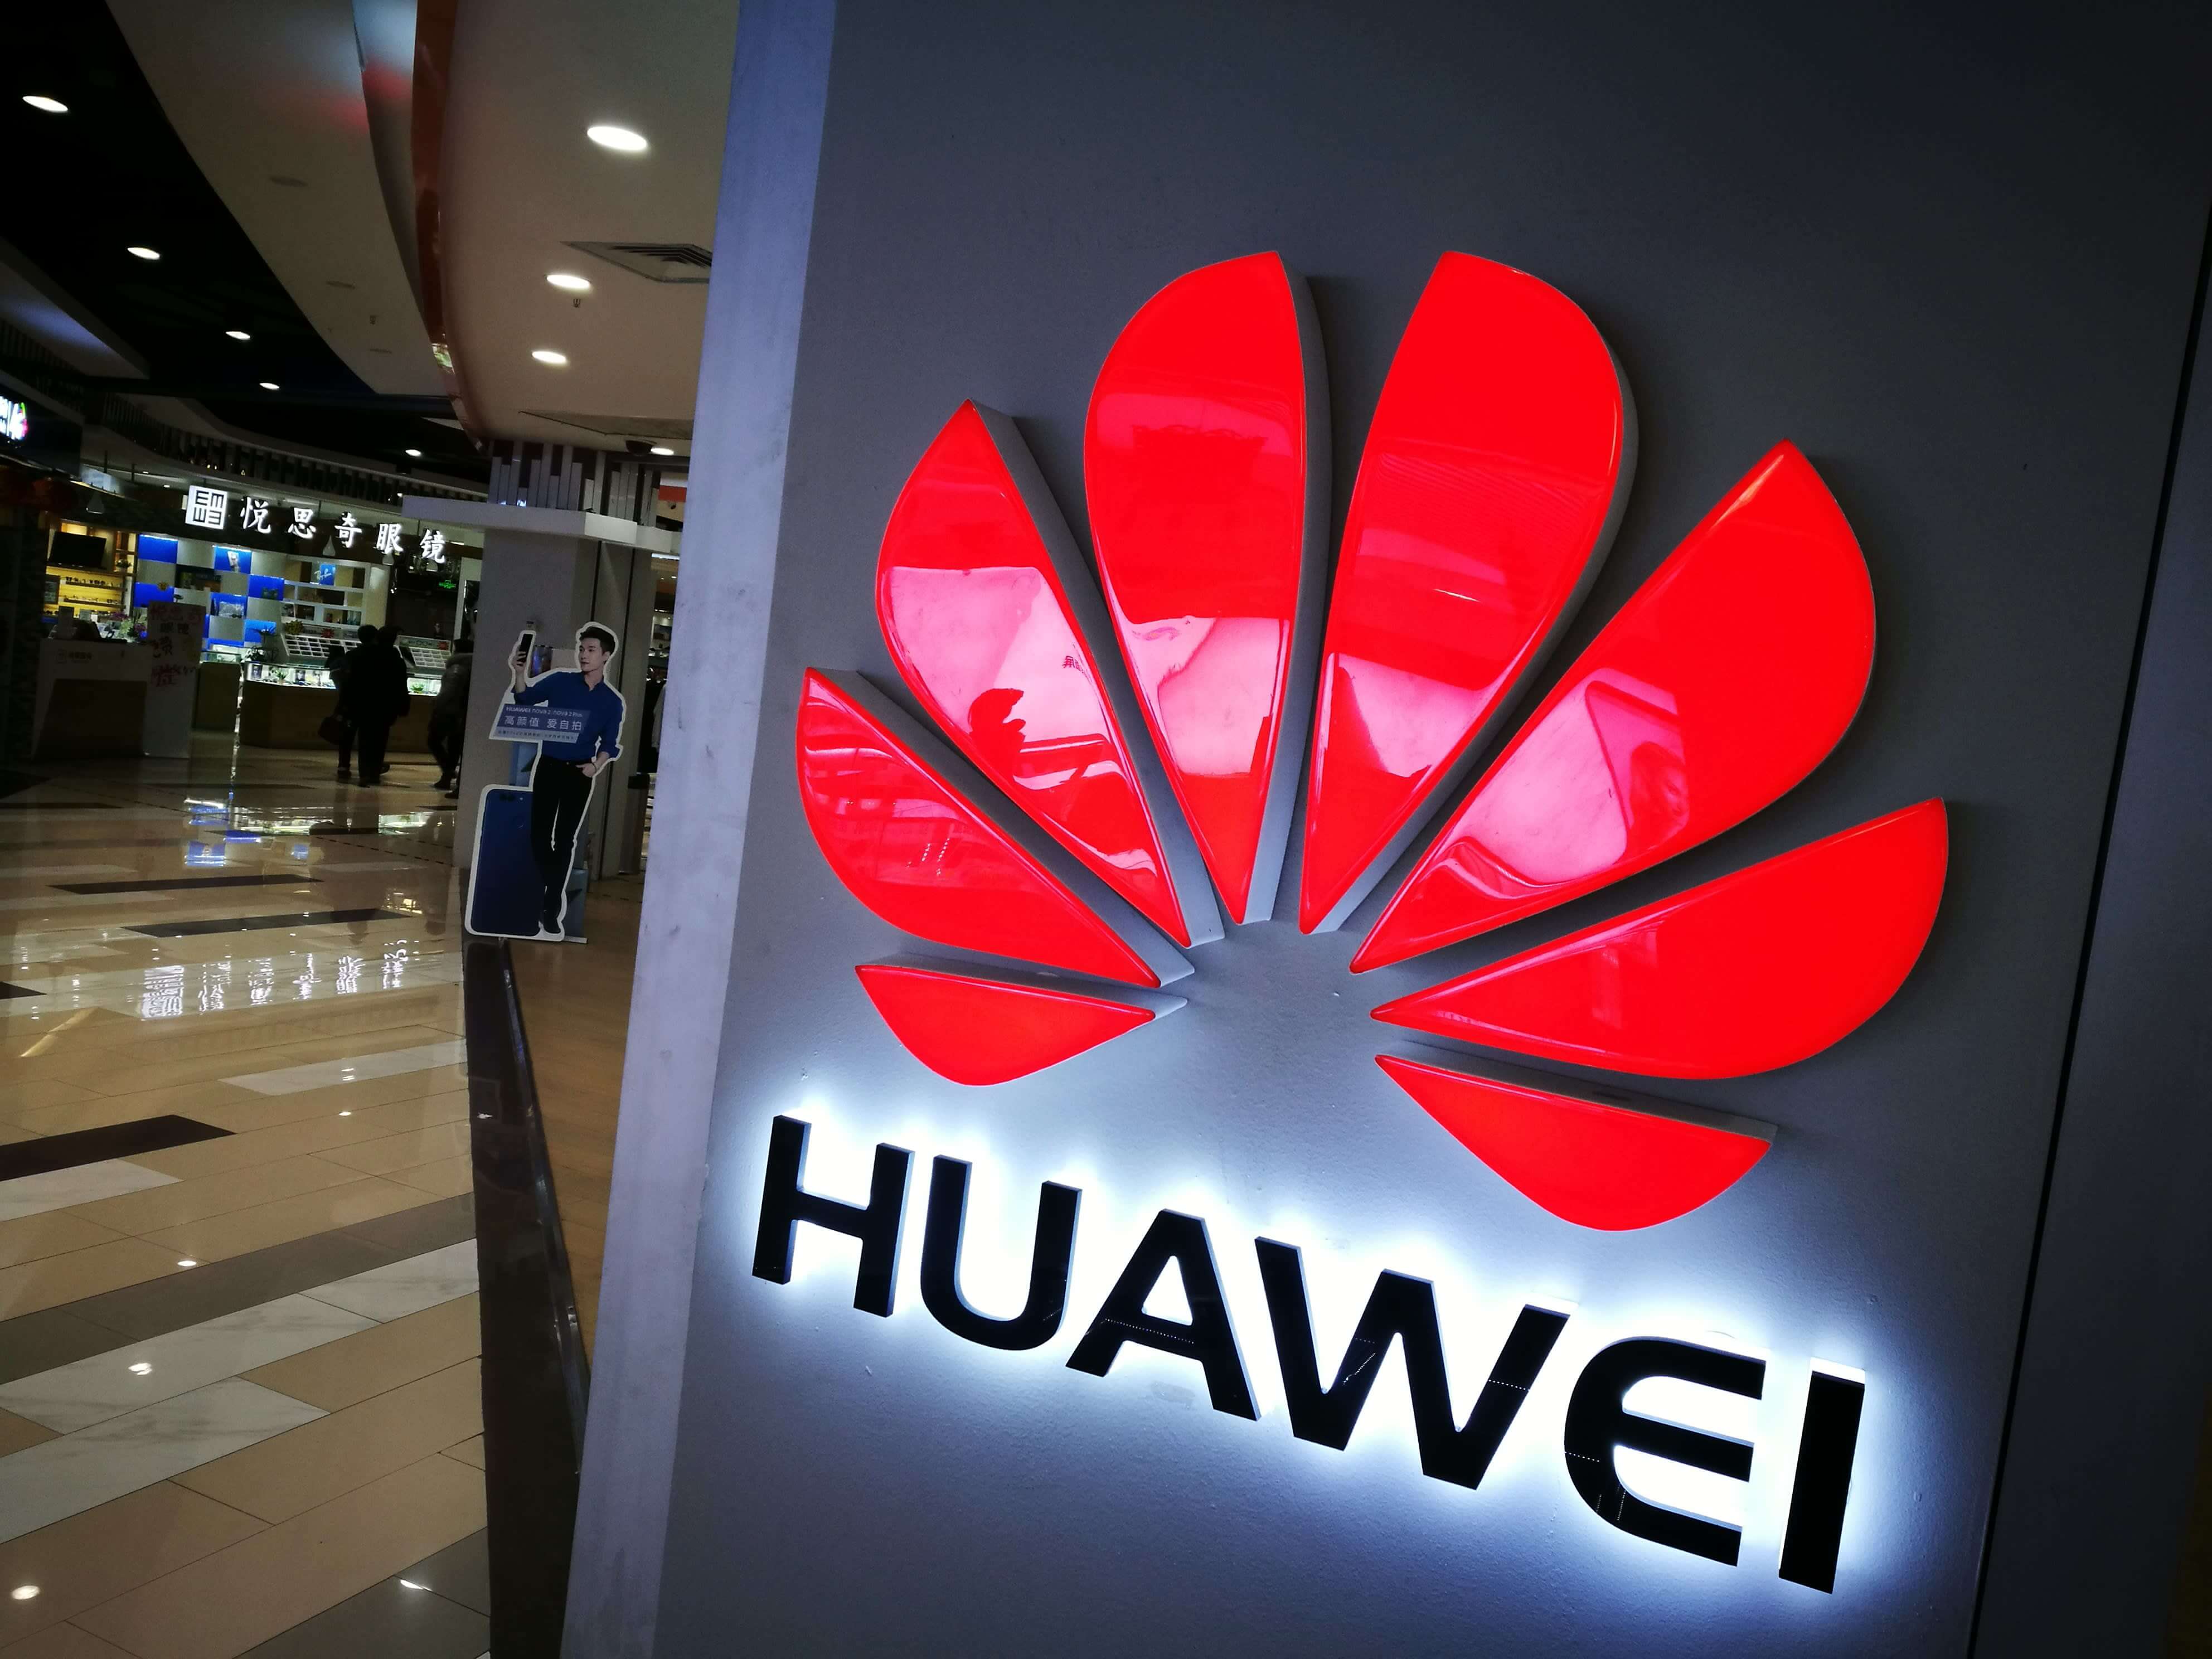 The EU wants to increase security around 5G networks, but it isn't banning Huawei